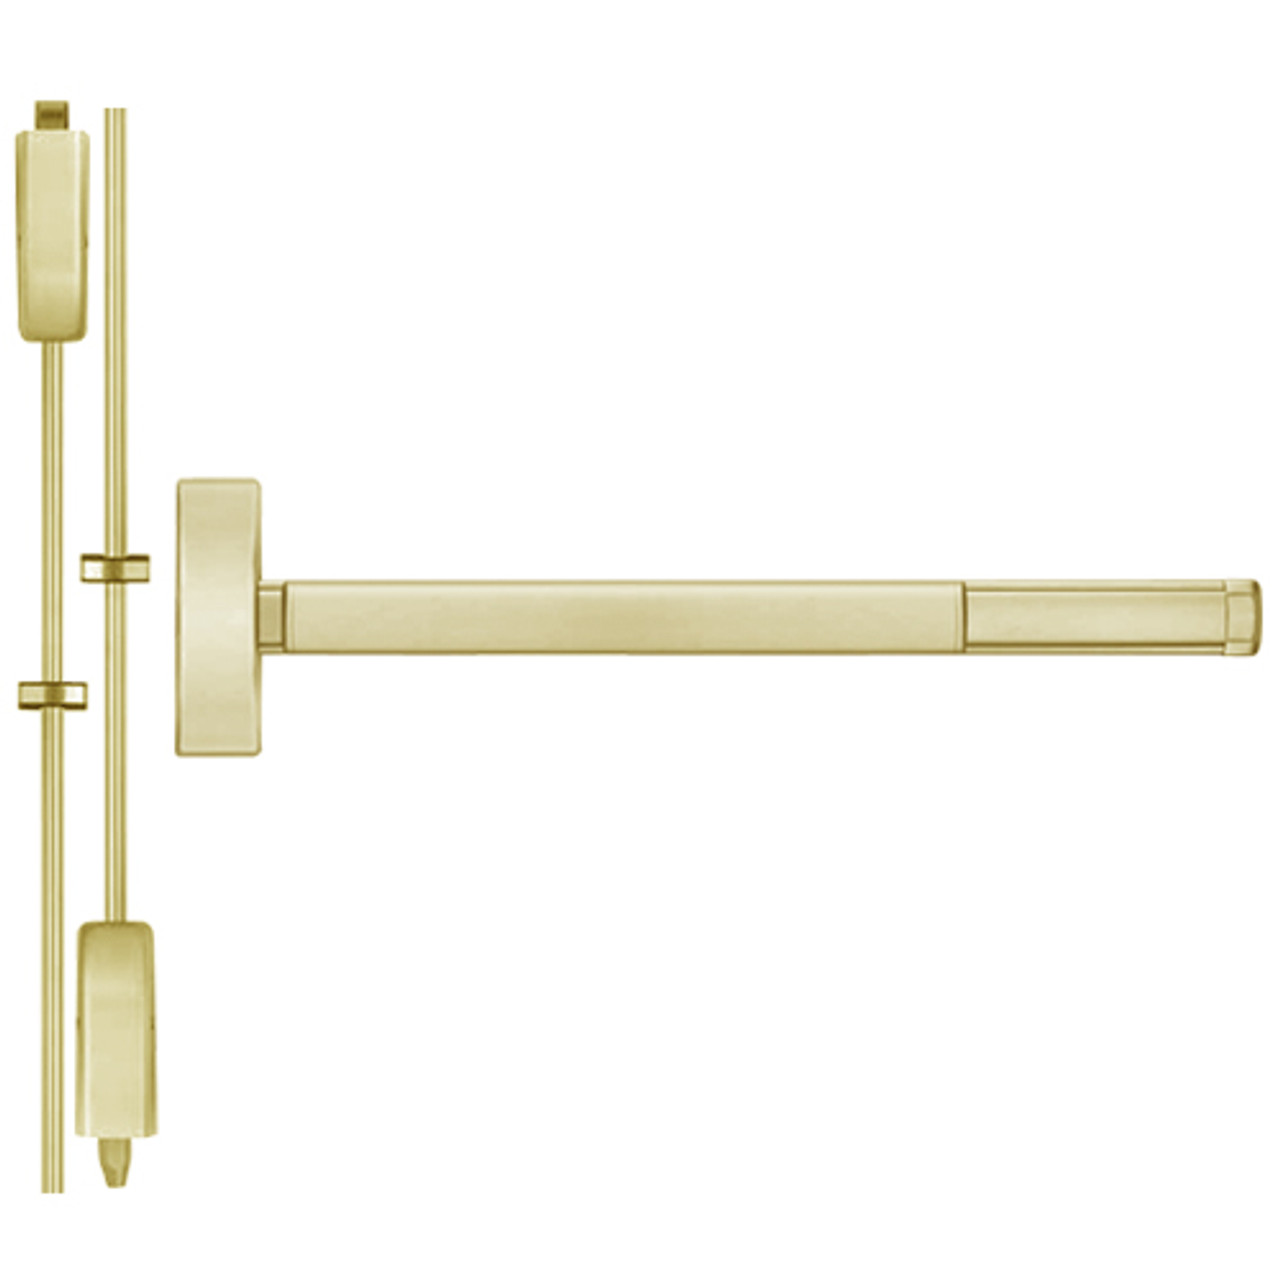 TS2201-606-36 PHI 2200 Series Non Fire Rated Apex Surface Vertical Rod Device with Touchbar Monitoring Switch Prepped for Cover Plate in Satin Brass Finish